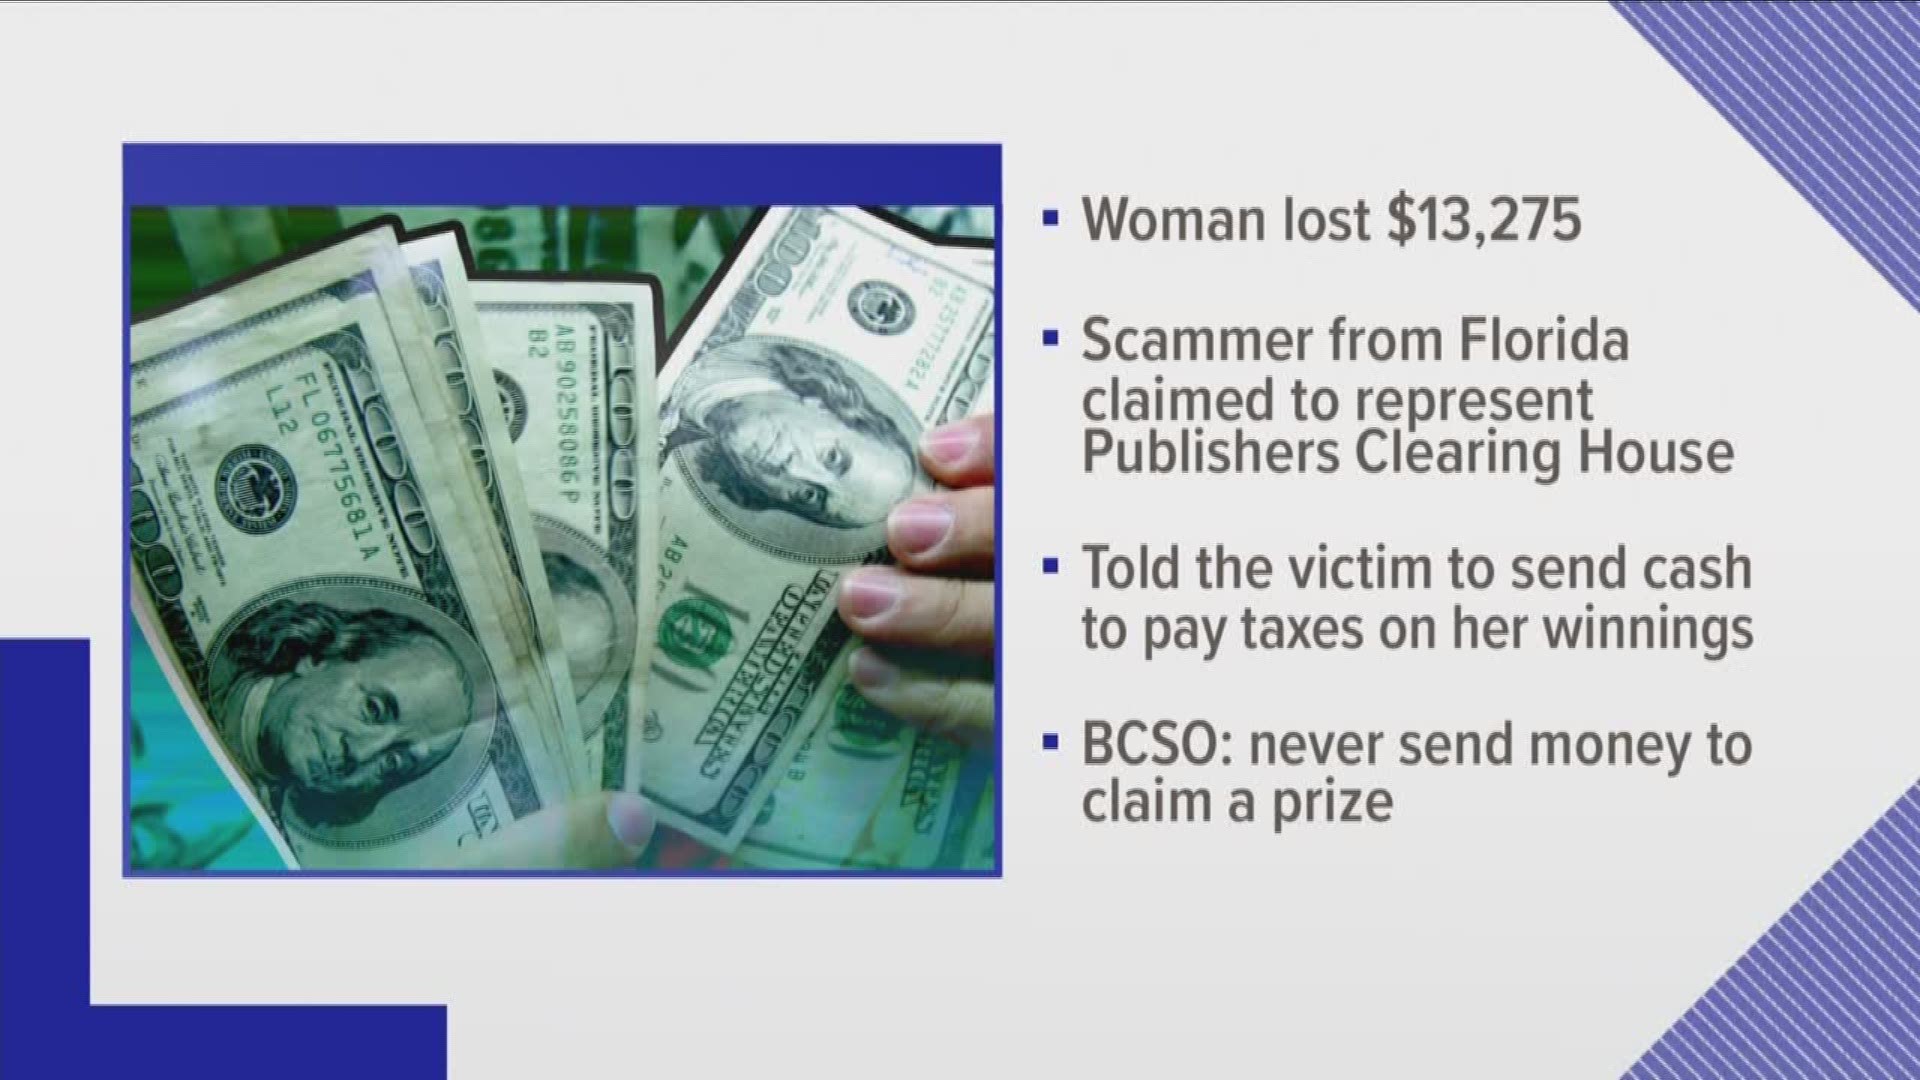 A Blount County woman was scammed out of more than $13,000 Wednesday from a person out of Florida who claimed to represent Publishers Clearing House, according to the sheriff's office. 

Investigators said the man told her she won millions of dollars in a Publishers Clearing House drawing but in order to claim the winnings, she would need to send him money to pay the taxes and keep her name private.